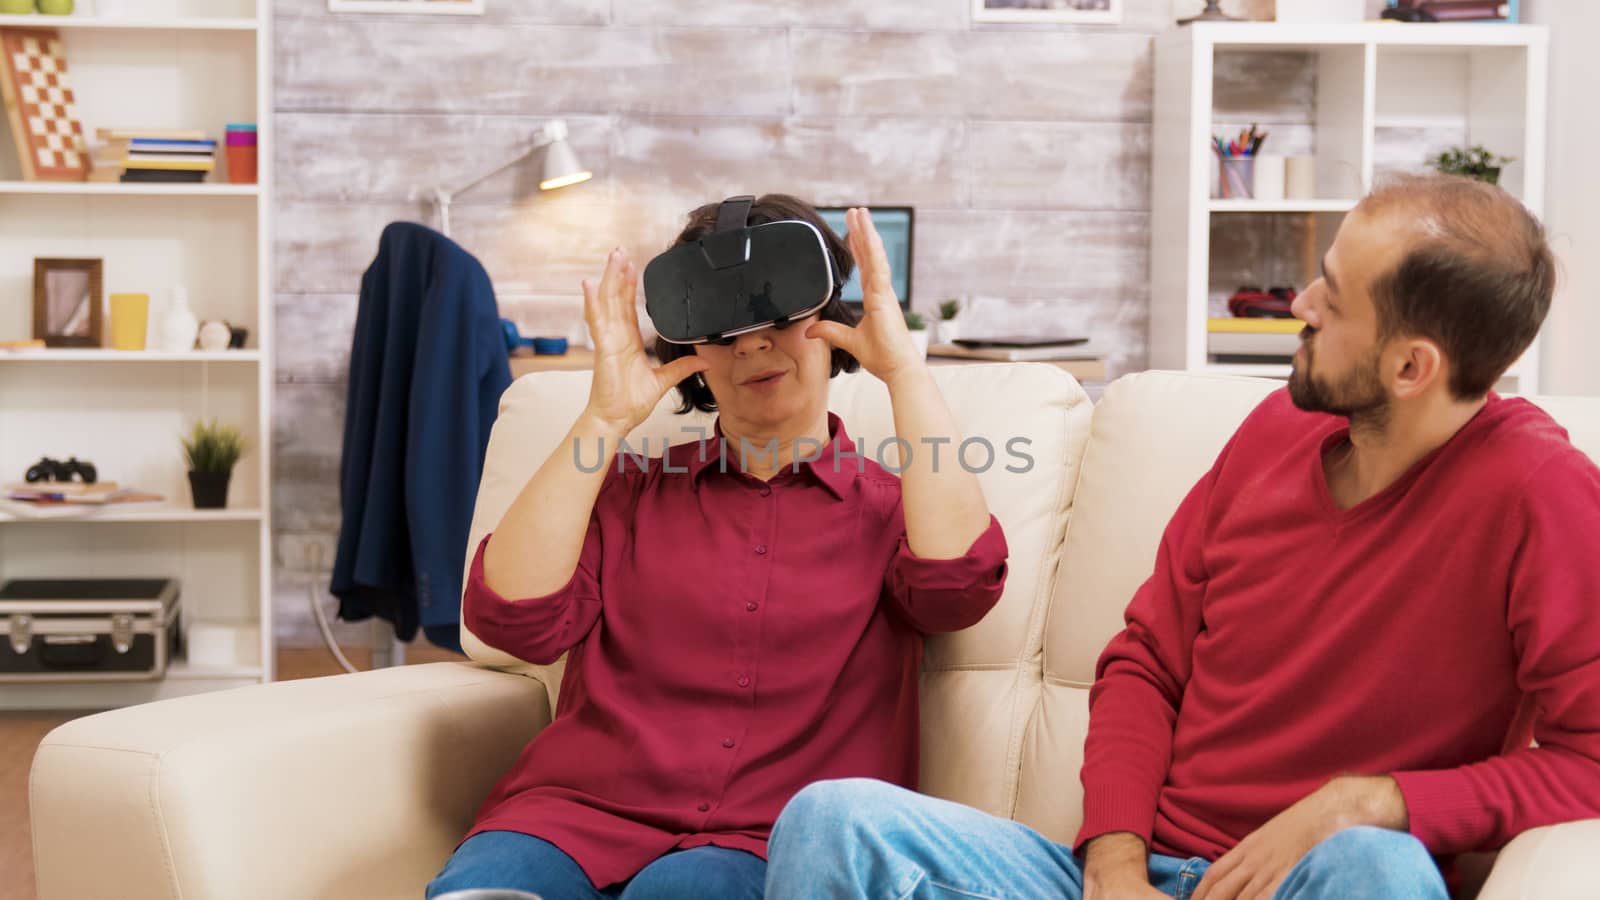 Nephew teaching his grandmother how to use virtual reality headset in living room